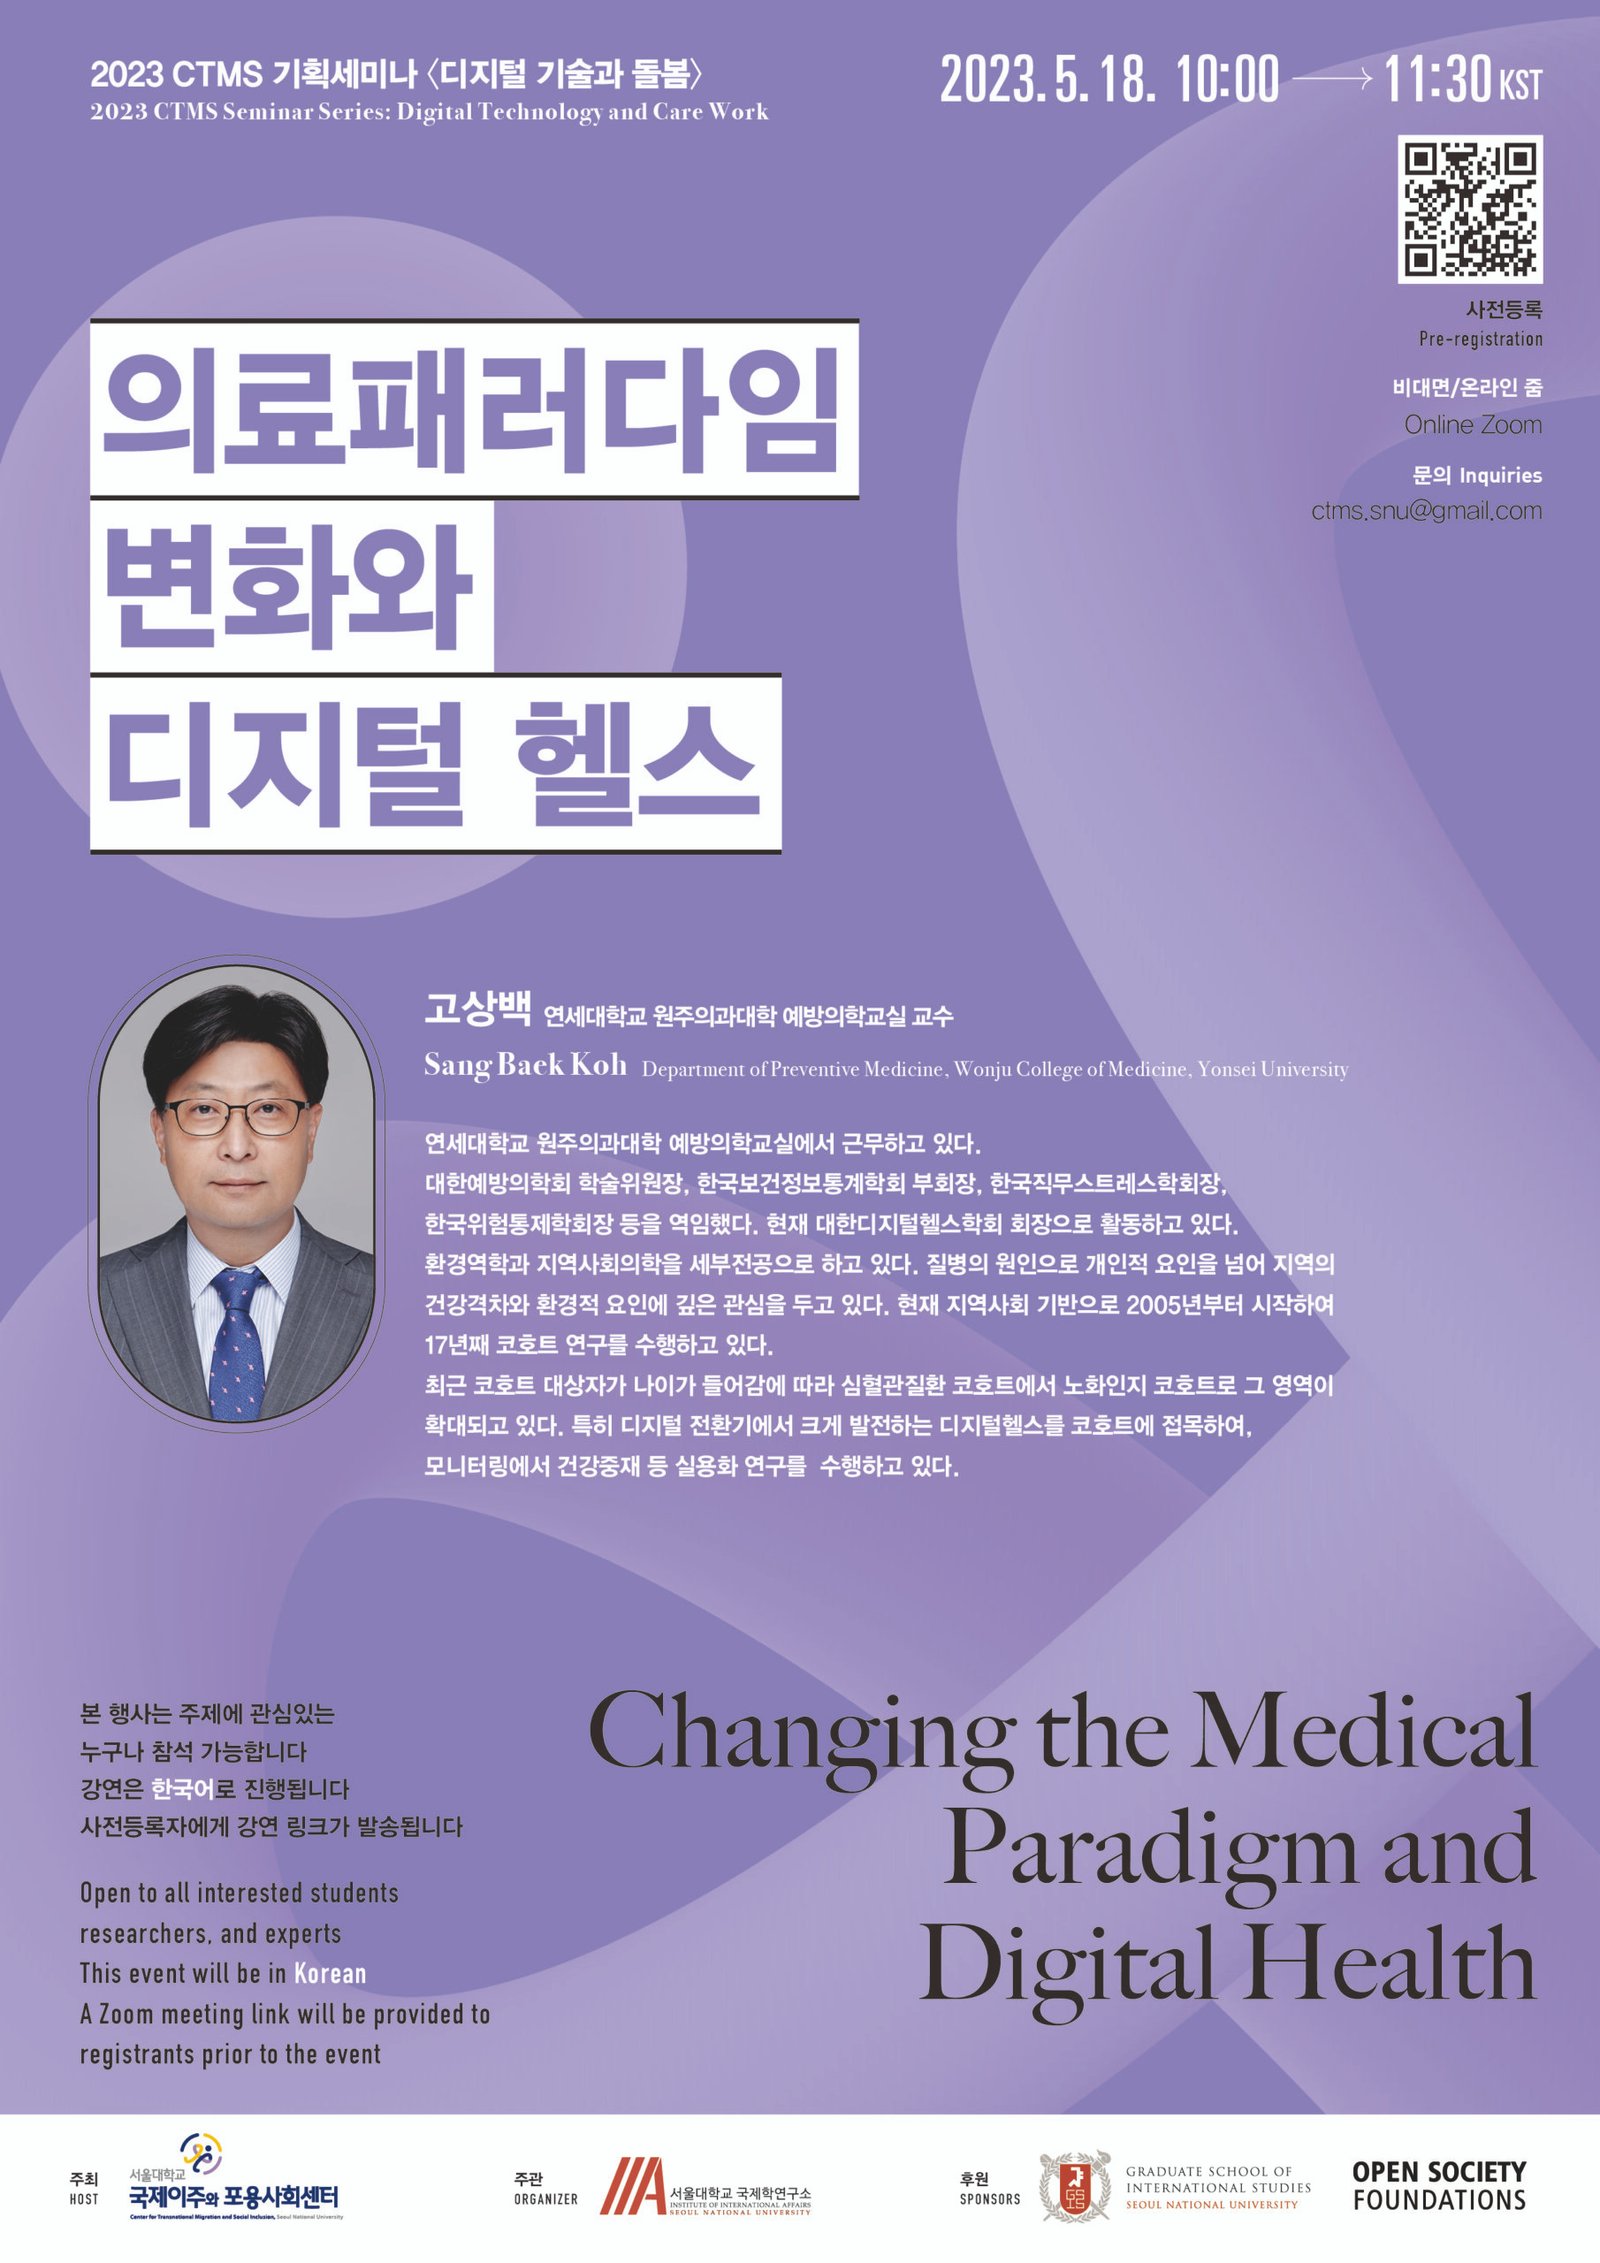 https://ctms.or.kr/wp-content/uploads/2023/05/CTMS-Seminar_Digital-Technology-and-Care-Work_202305-scaled.jpg